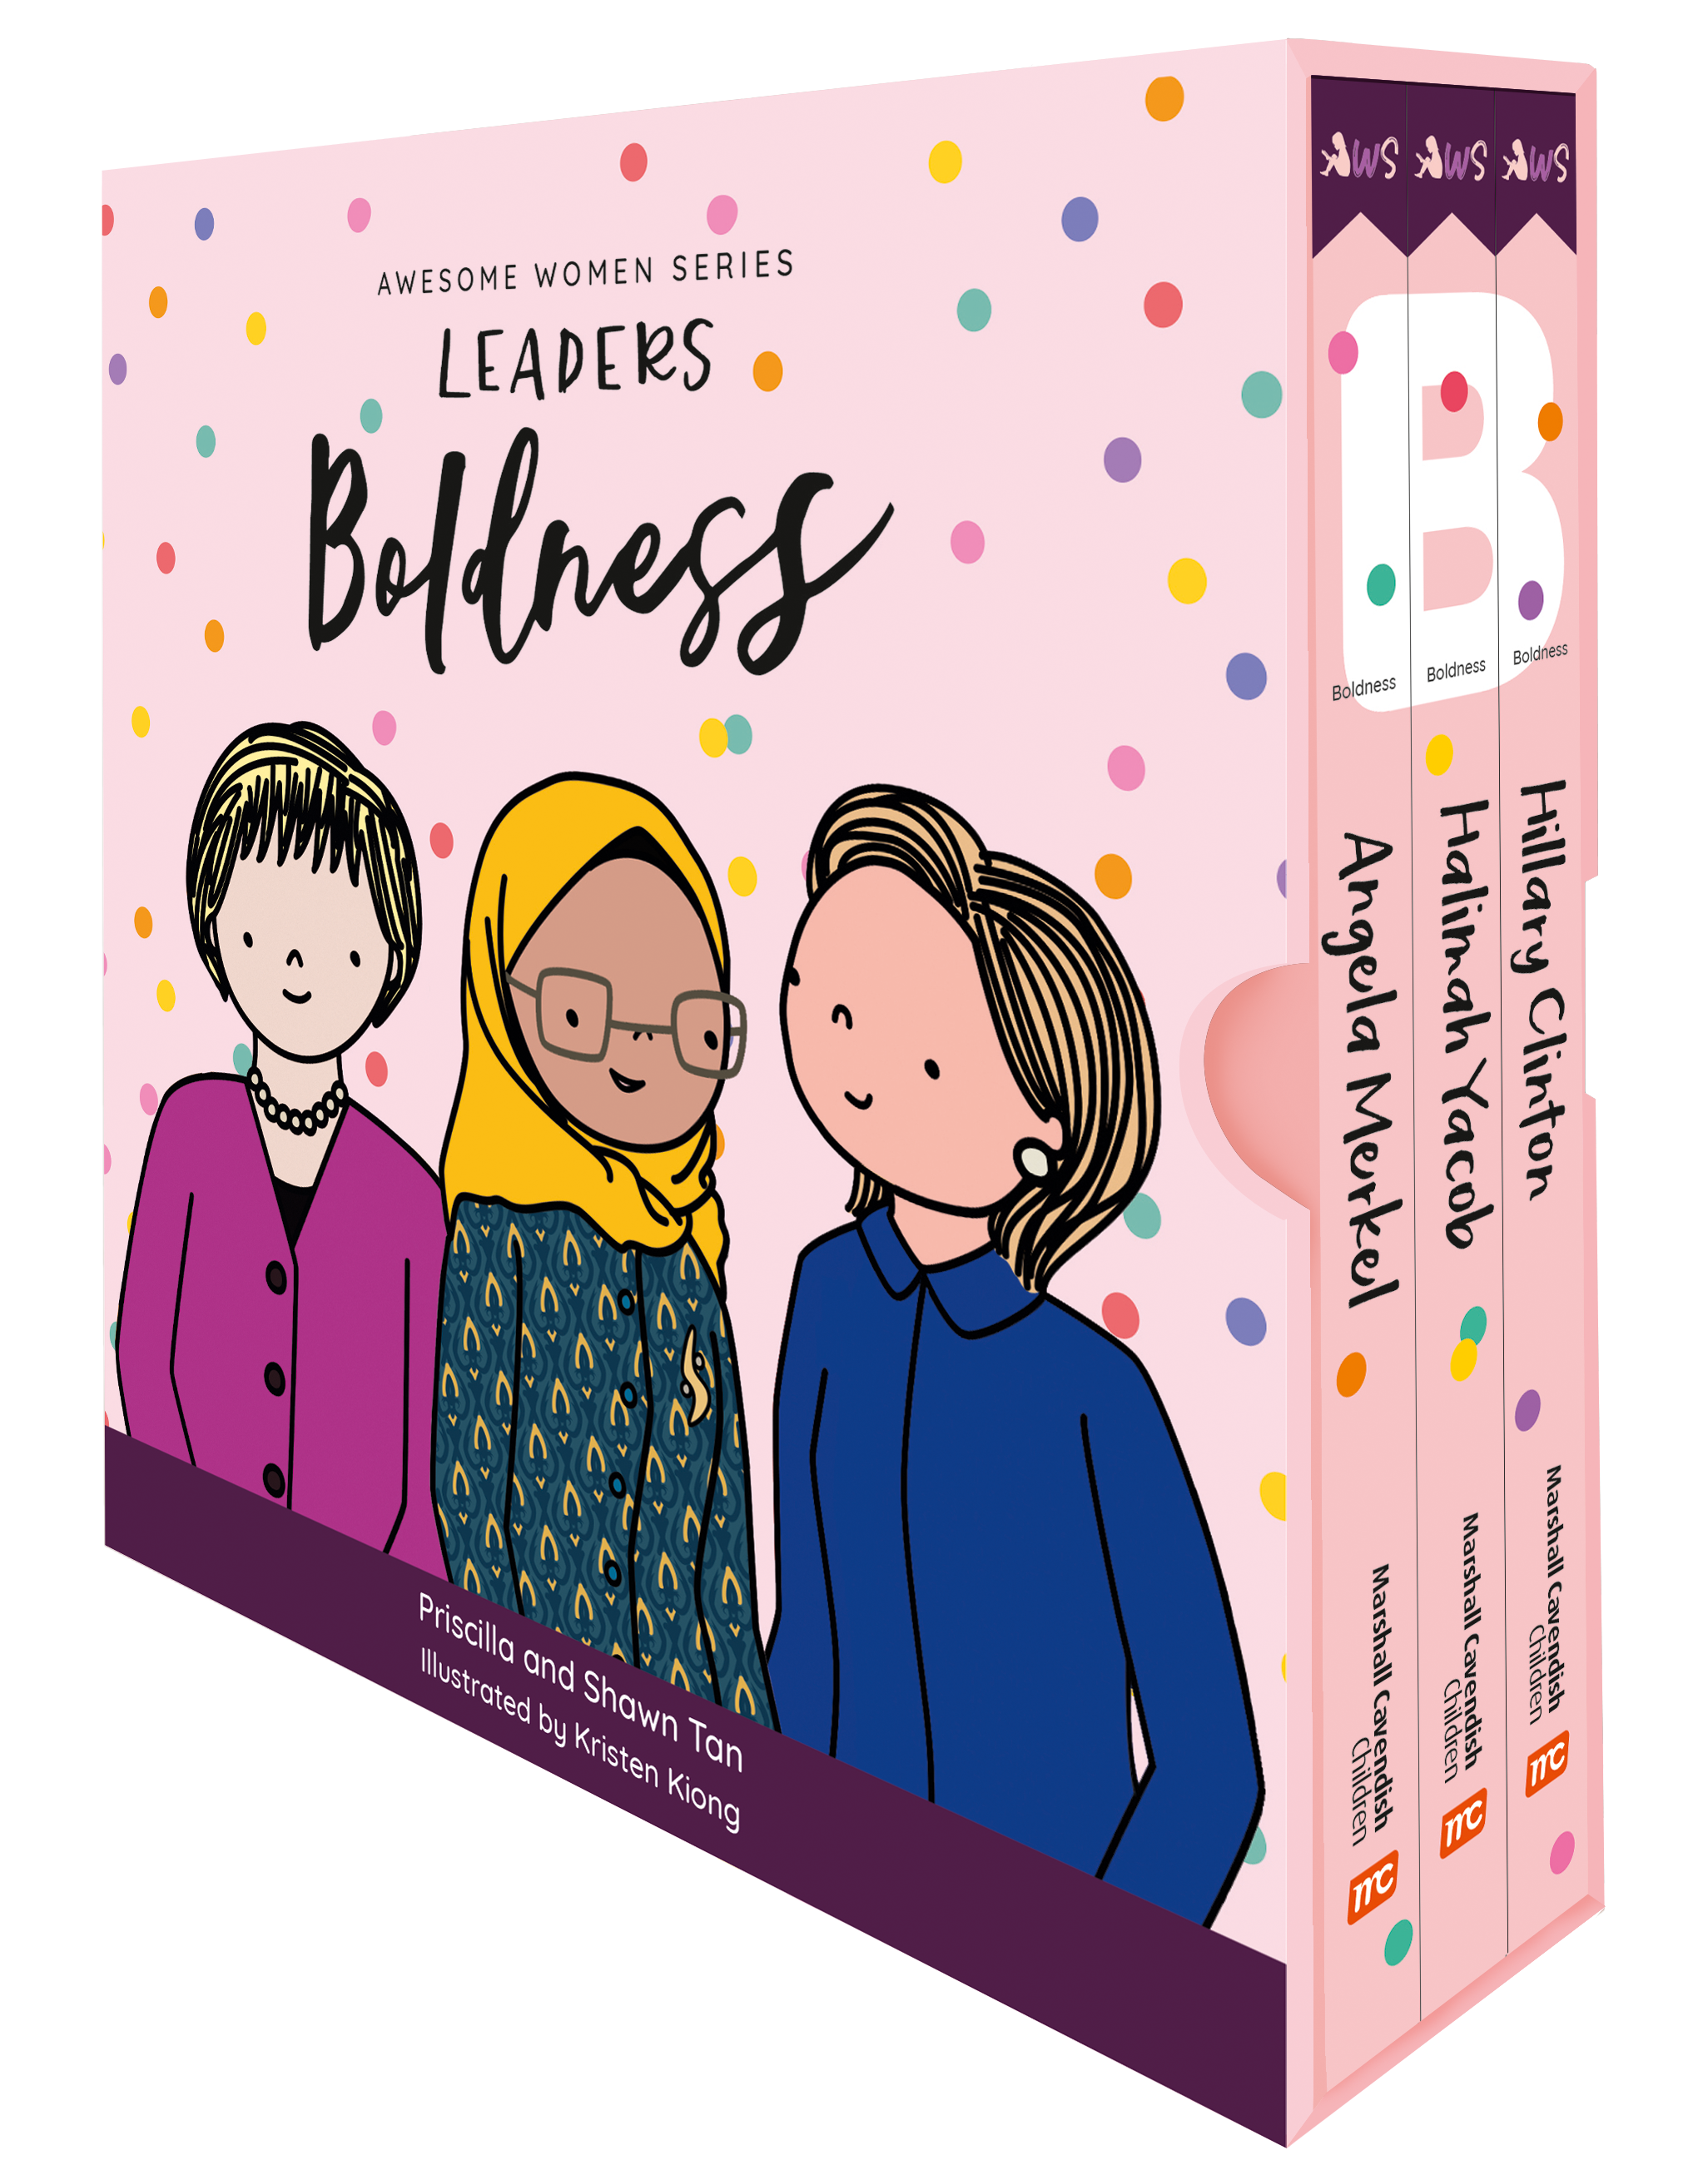 Awesome Women Series Leaders: Boldness